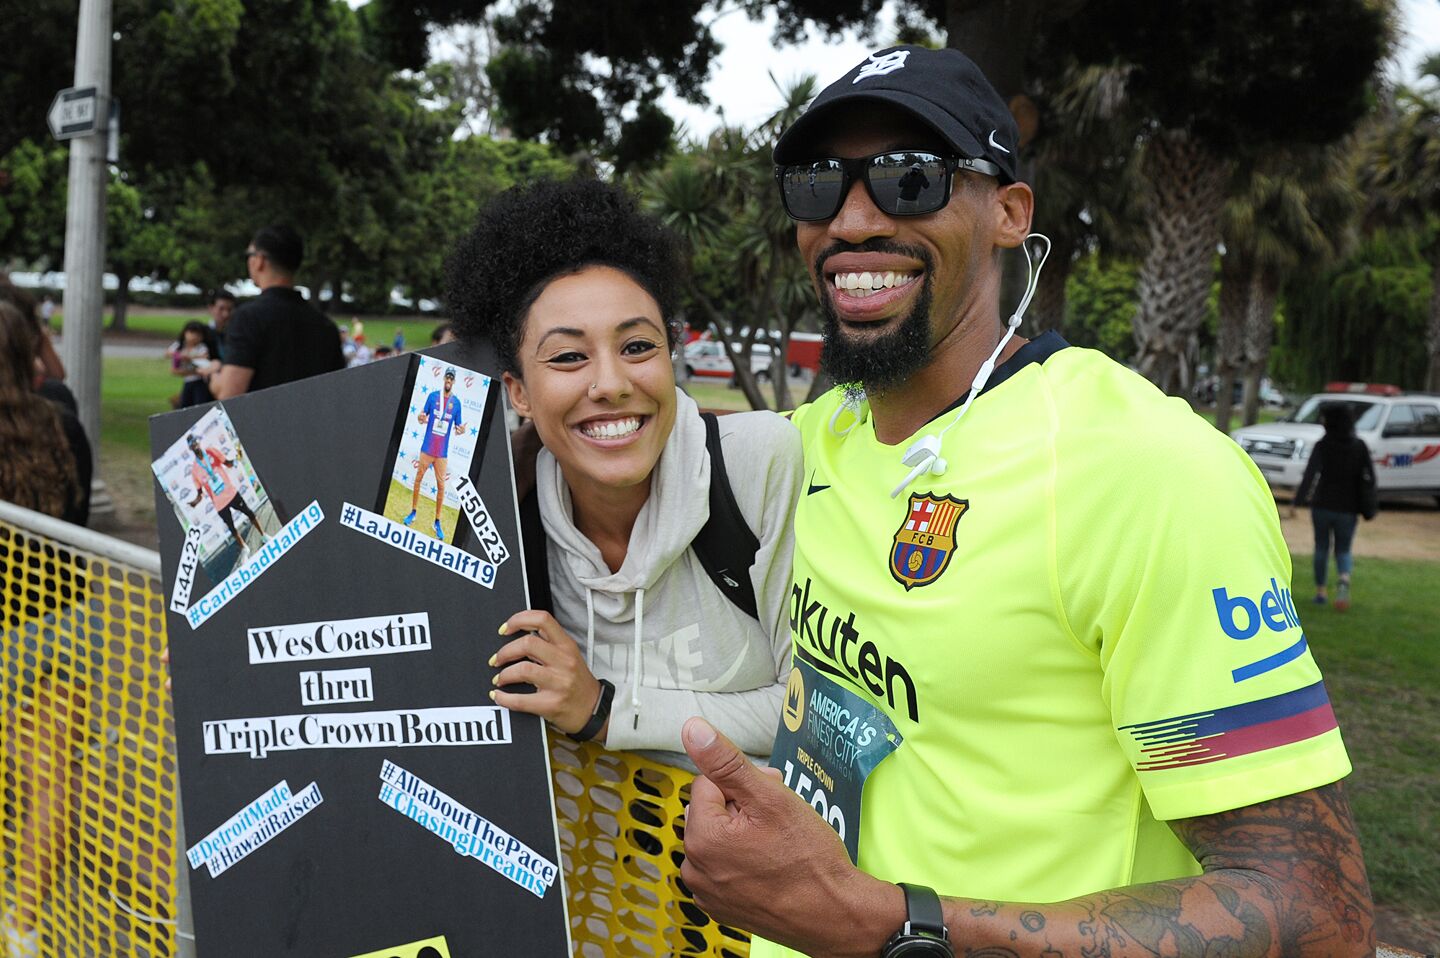 SPOTTED: 8.18.19 Americas Finest City Half Marathon & 5K